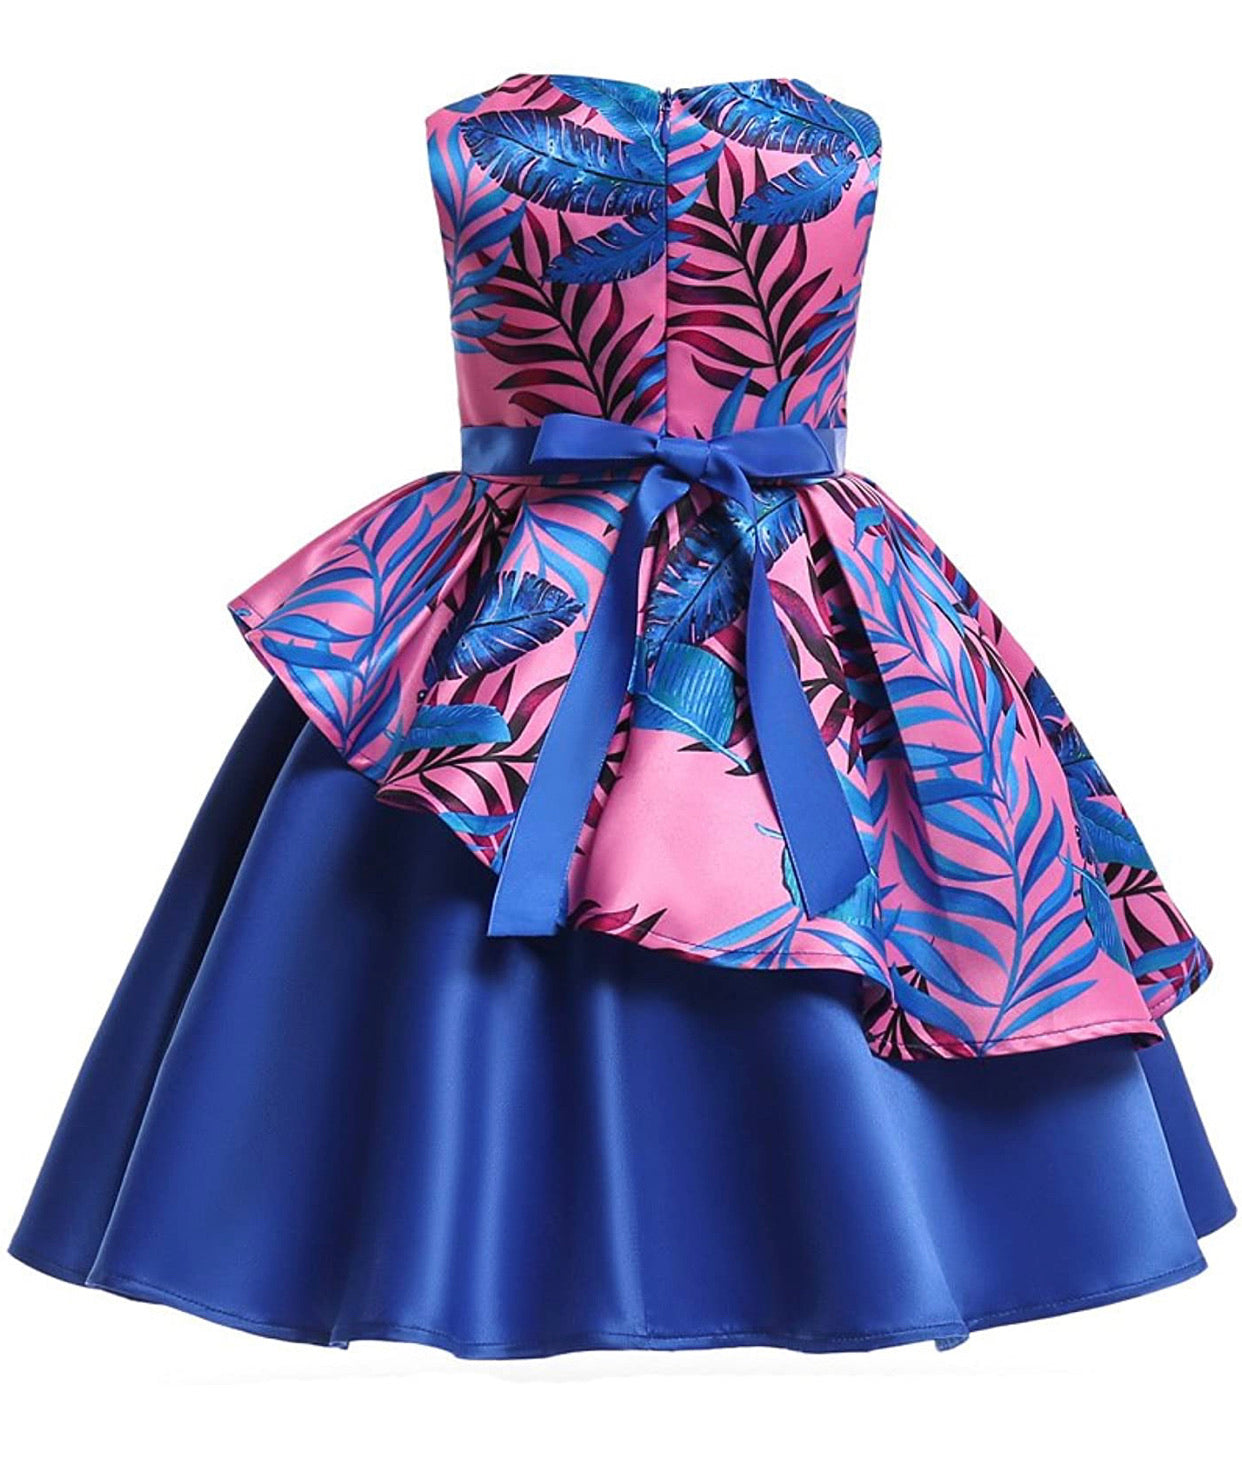 Little Girl’s Formal Floral Print Dress, Sizes 2T - 9 years (Navy Blue / Pink)